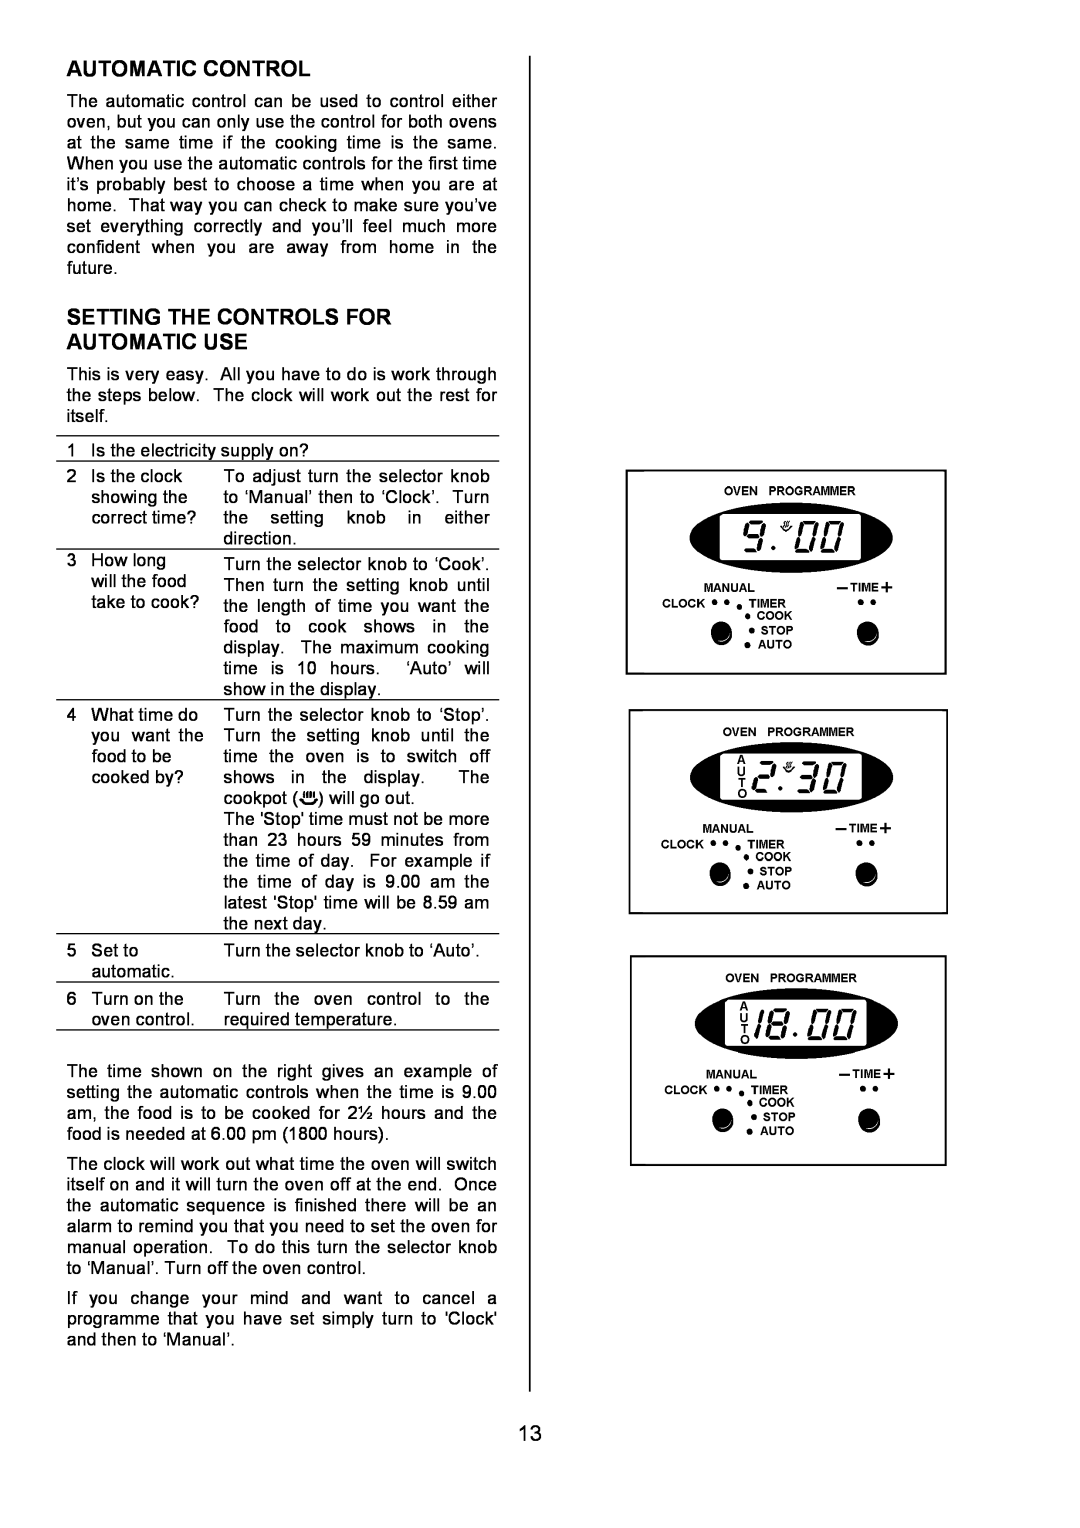 Tricity Bendix SI505 installation instructions Automatic Control, Setting The Controls For Automatic Use 